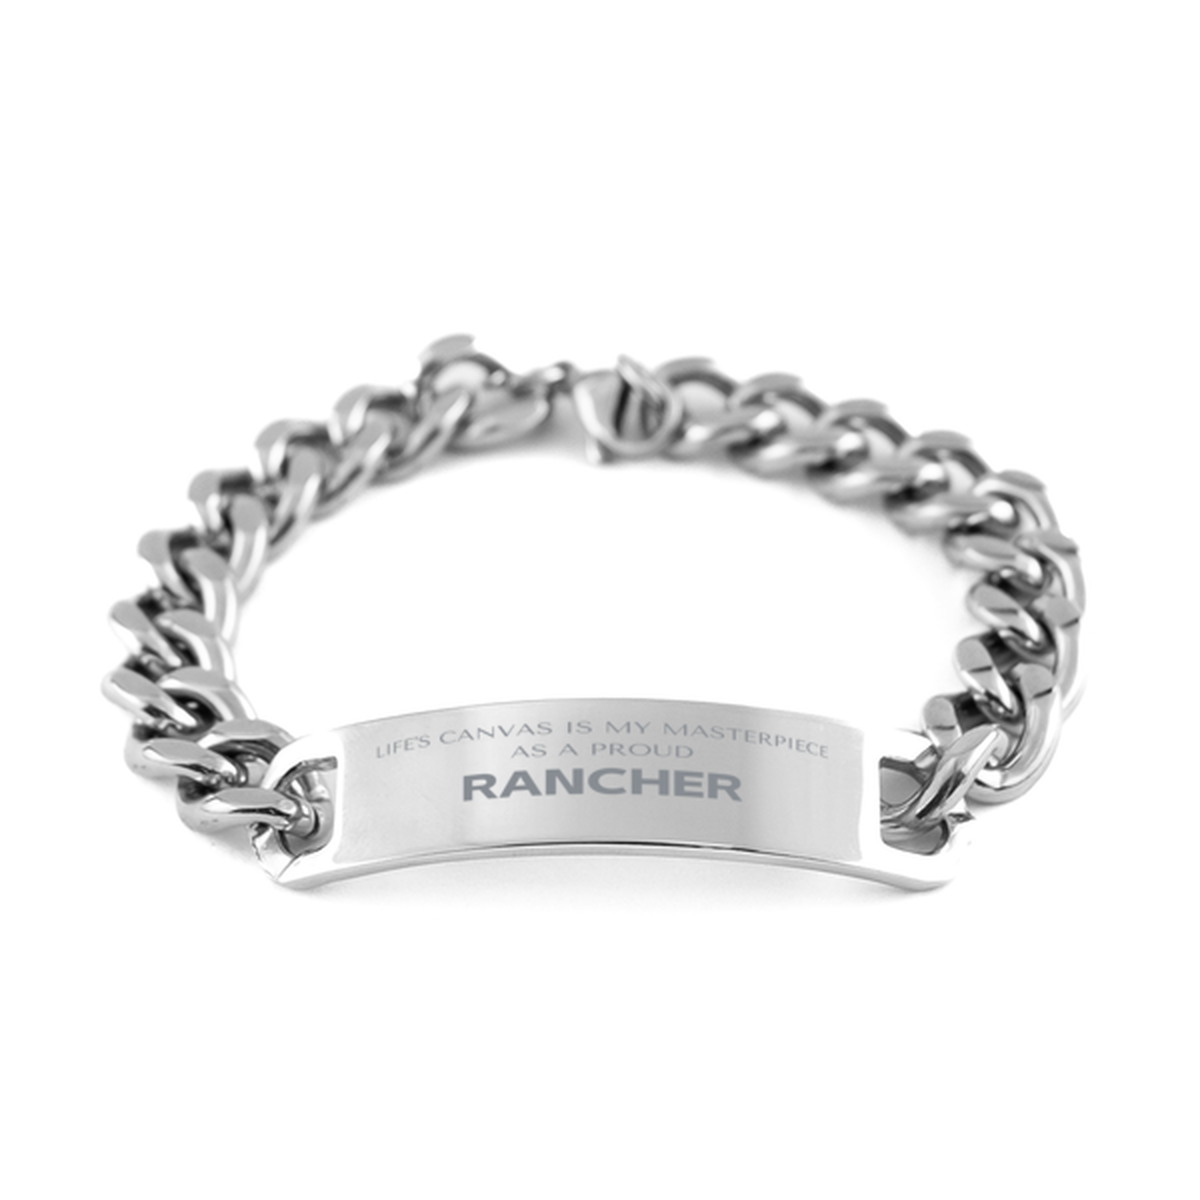 Proud Rancher Gifts, Life's canvas is my masterpiece, Epic Birthday Christmas Unique Cuban Chain Stainless Steel Bracelet For Rancher, Coworkers, Men, Women, Friends